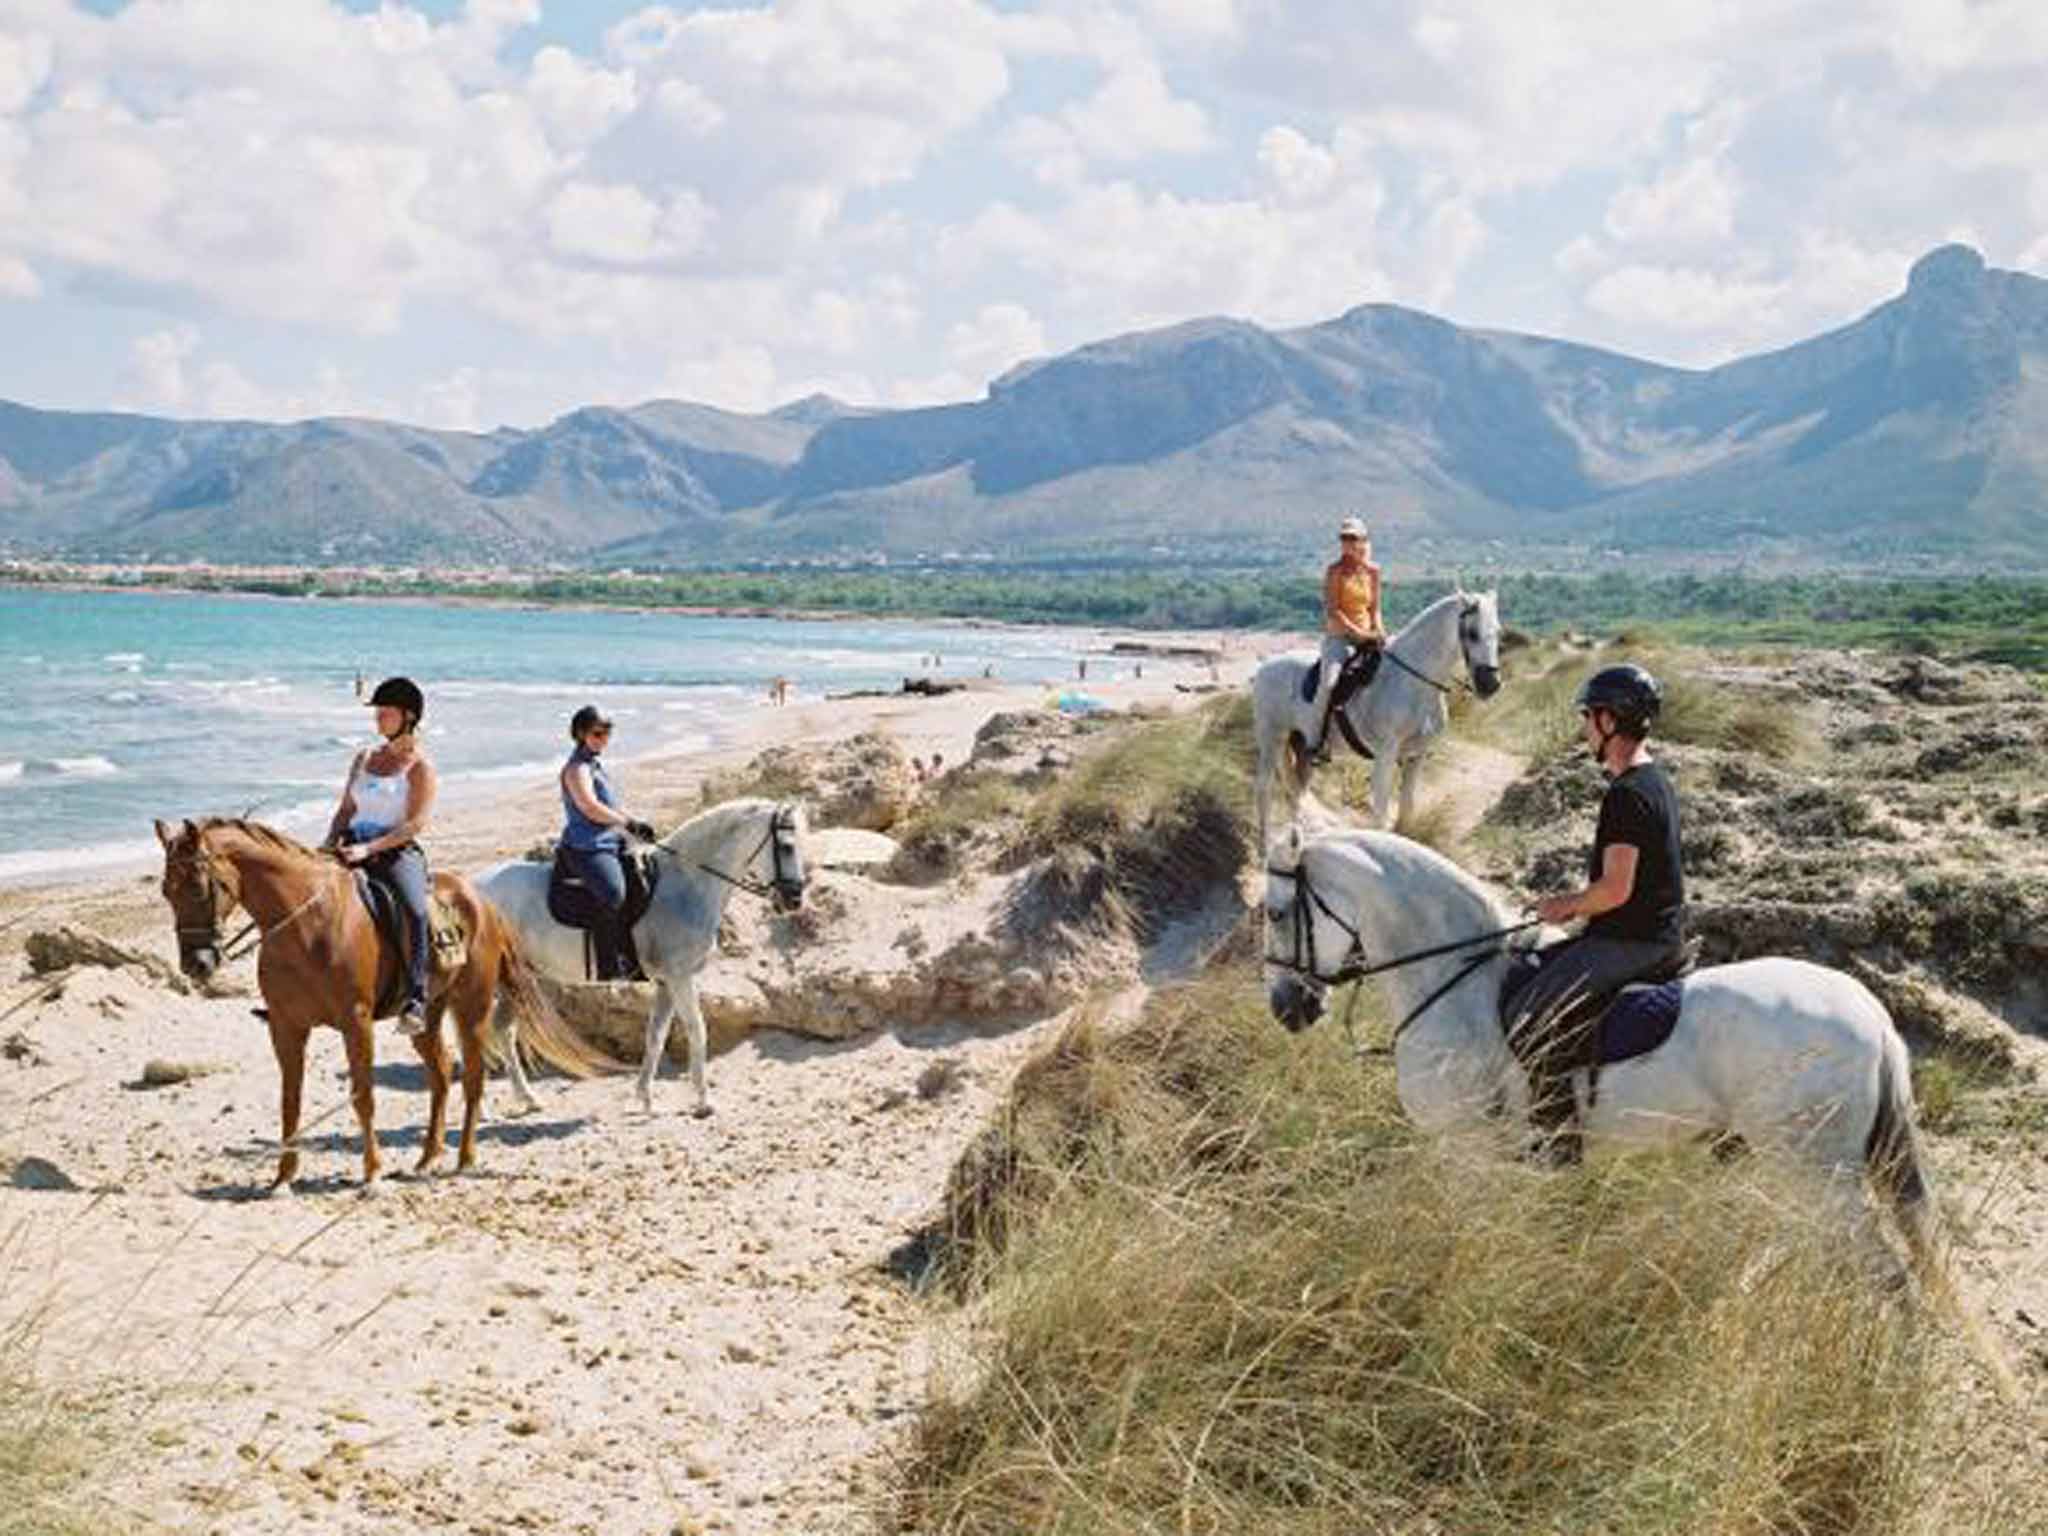 Hoof-prints in the sand: a coastal ride in Mallorca